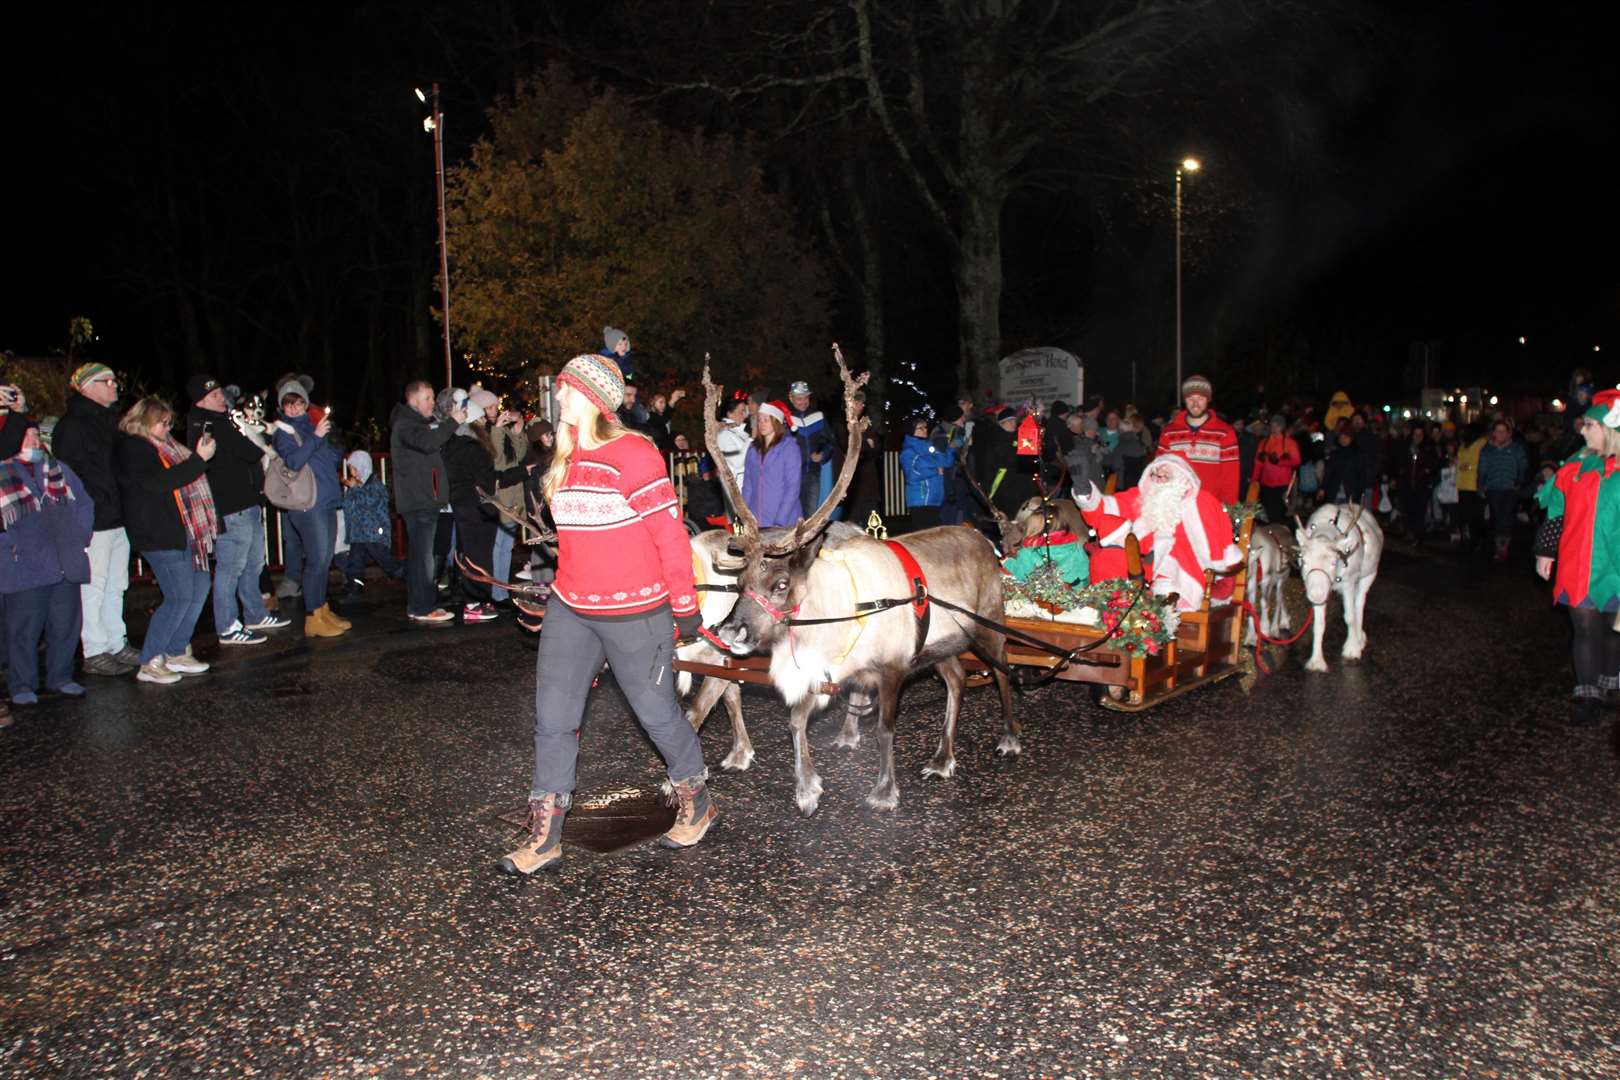 Santa takes a ride through the strath last year in traditional style.